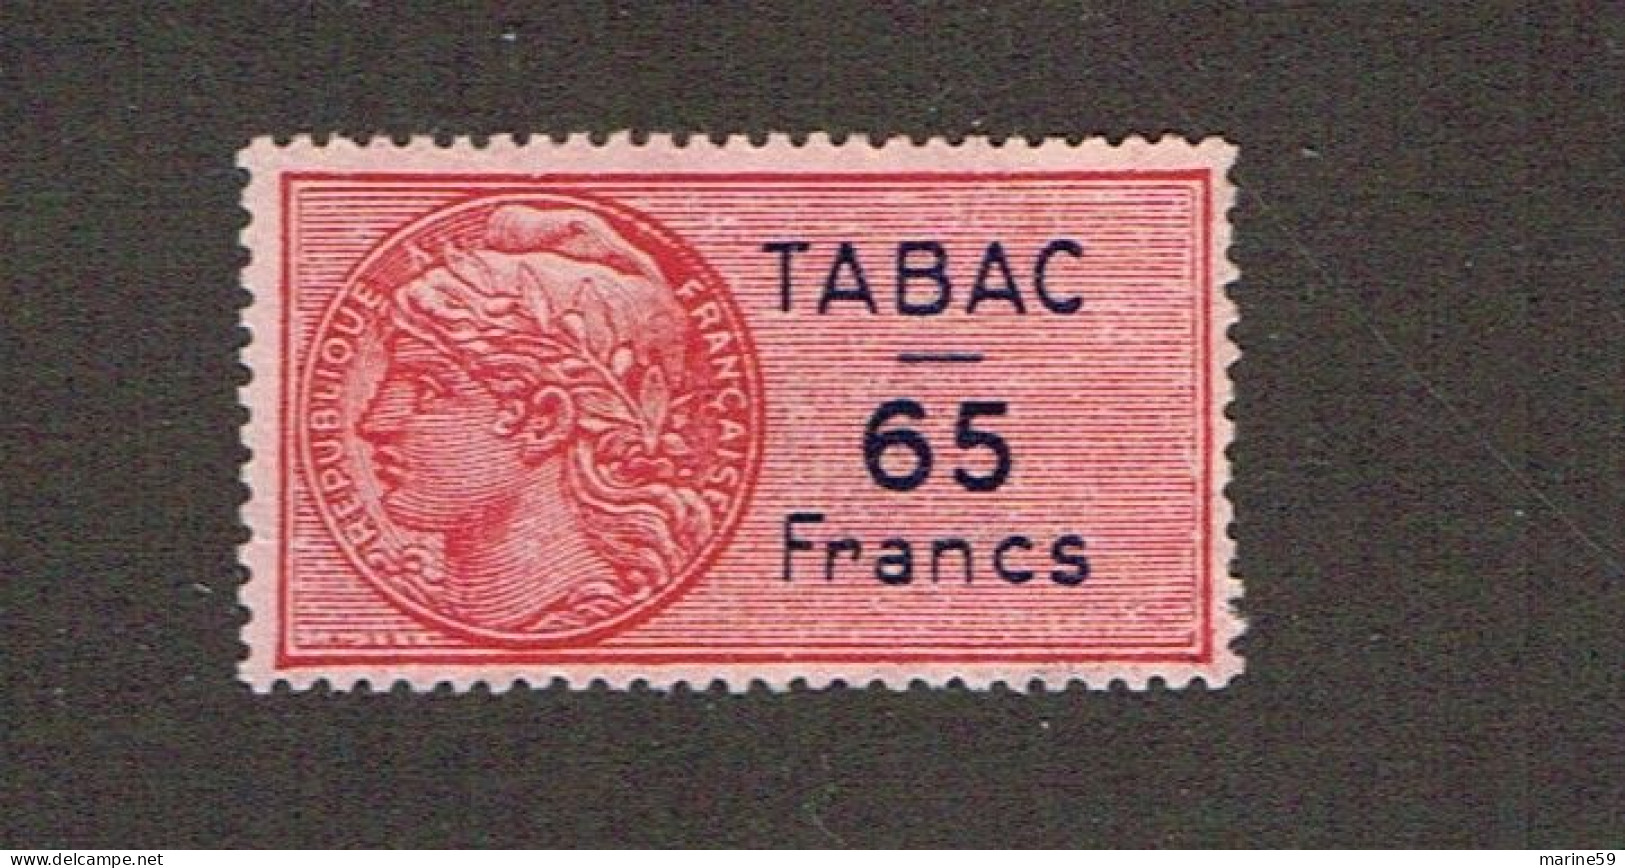 MA 131 - FRANCE - N° 1 - TABAC  - NSG - Stamps